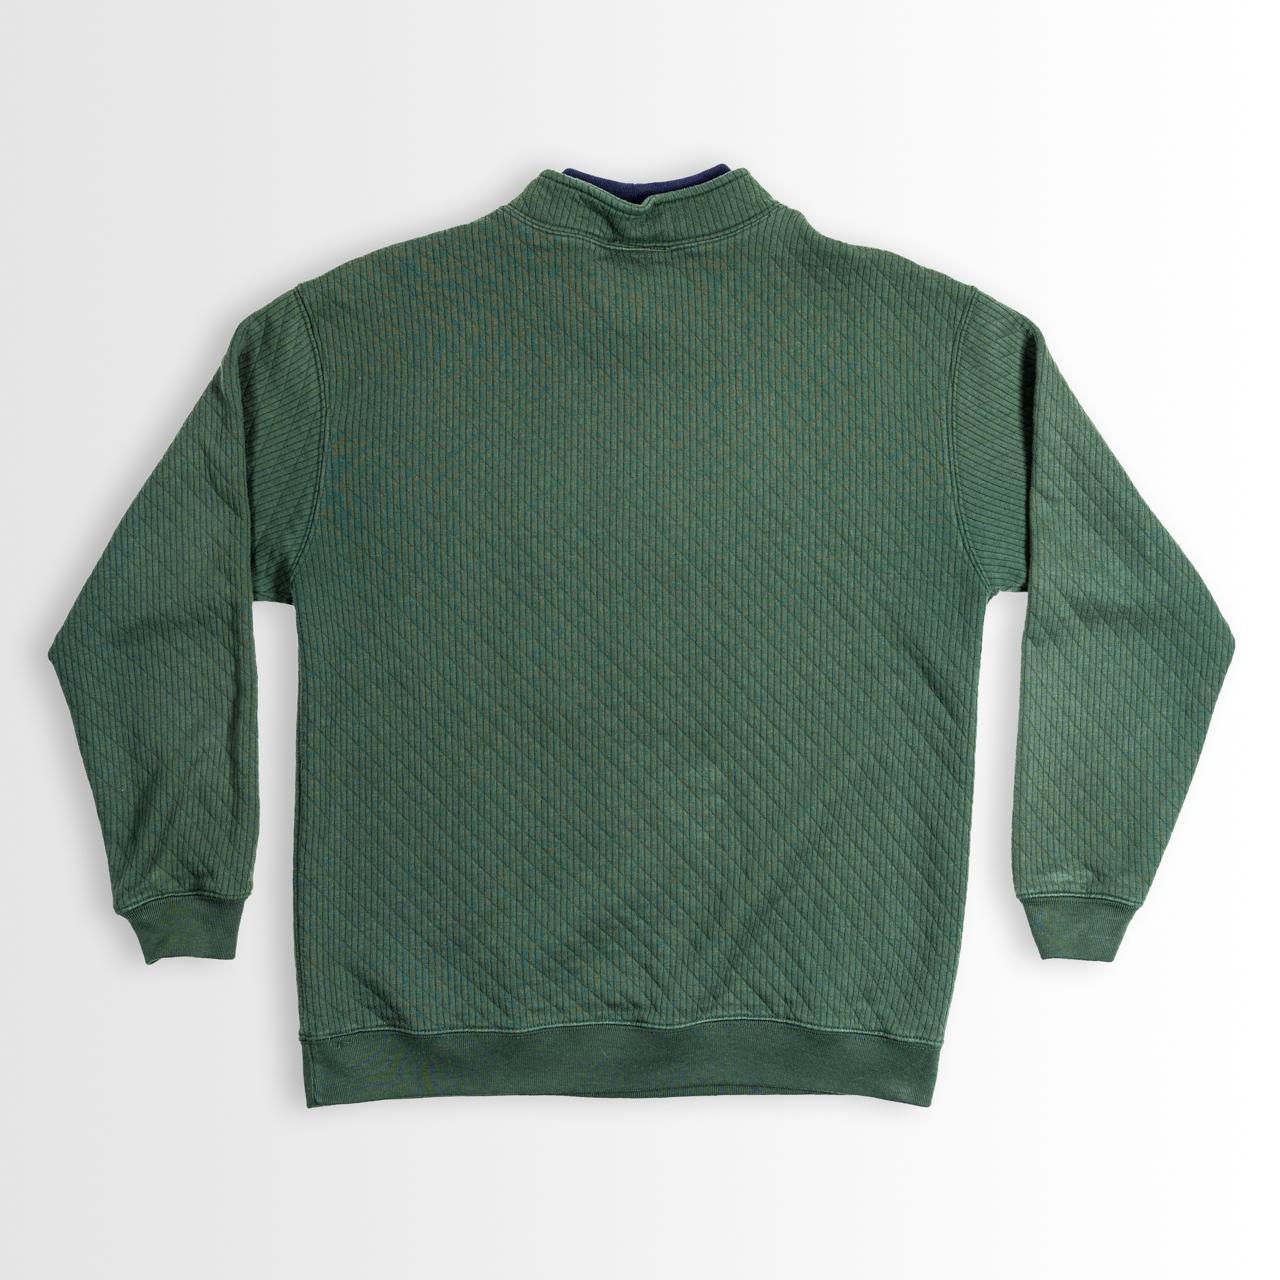 EB Sport Men's Green and Red Jumper (2)